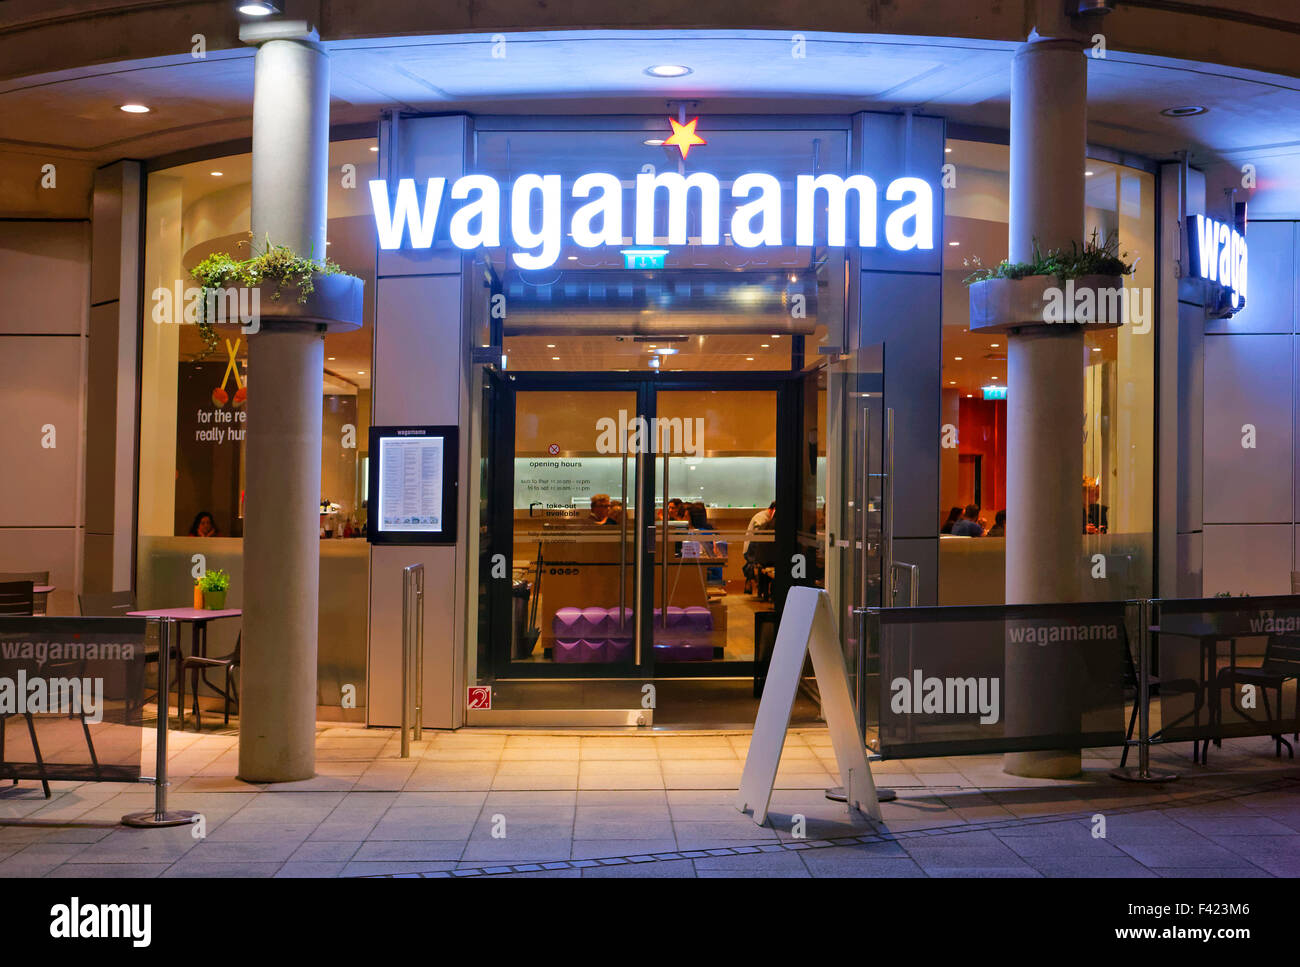 Wagamama restaurant at night in the UK Stock Photo